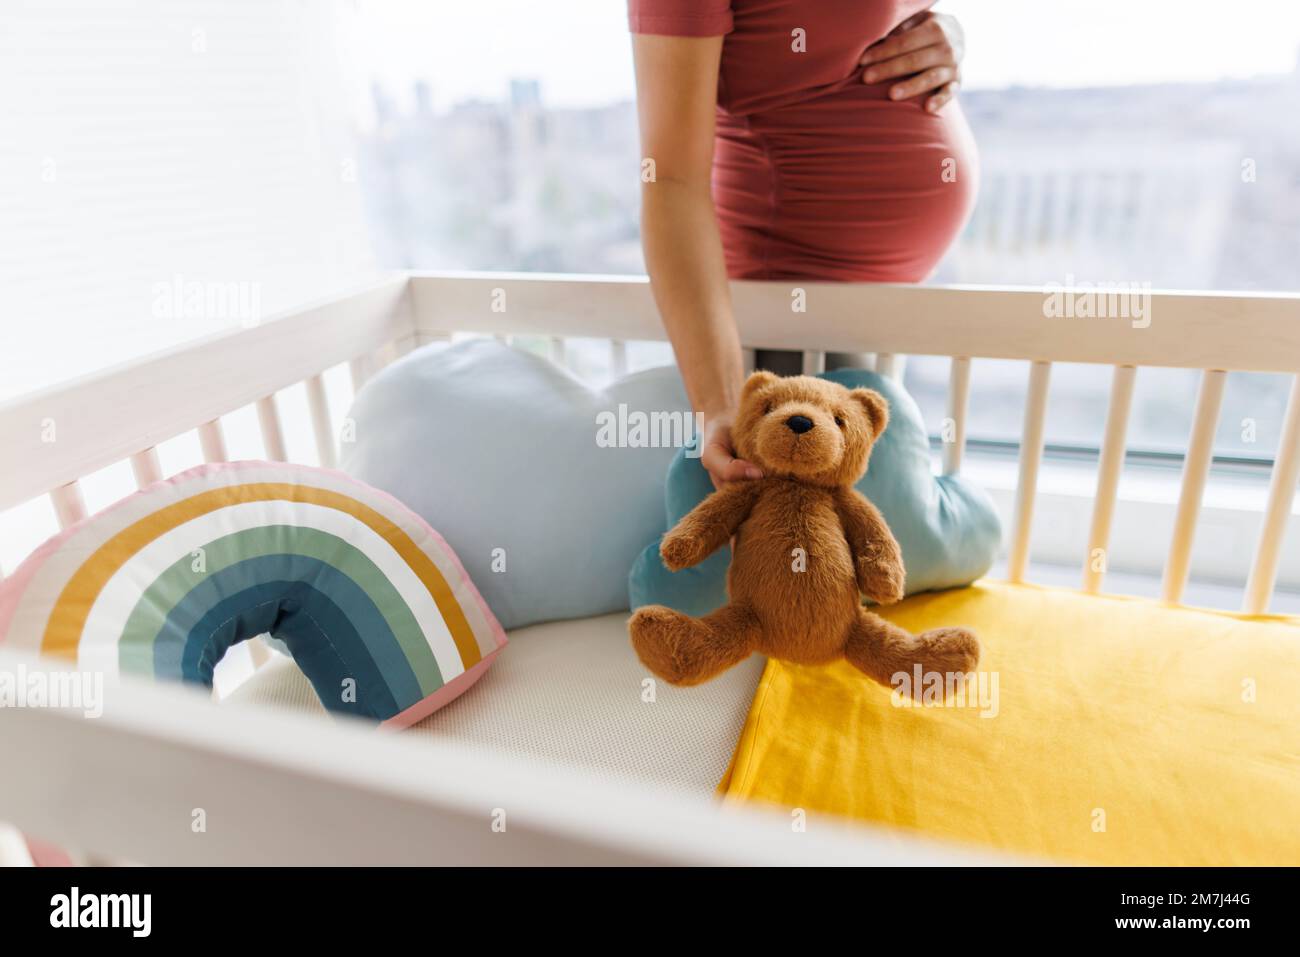 Pregnancy. Pregnant woman preparing nursery holding belly baby bump by crib holding teddy bear. regnancy concept and home nusery planning Stock Photo